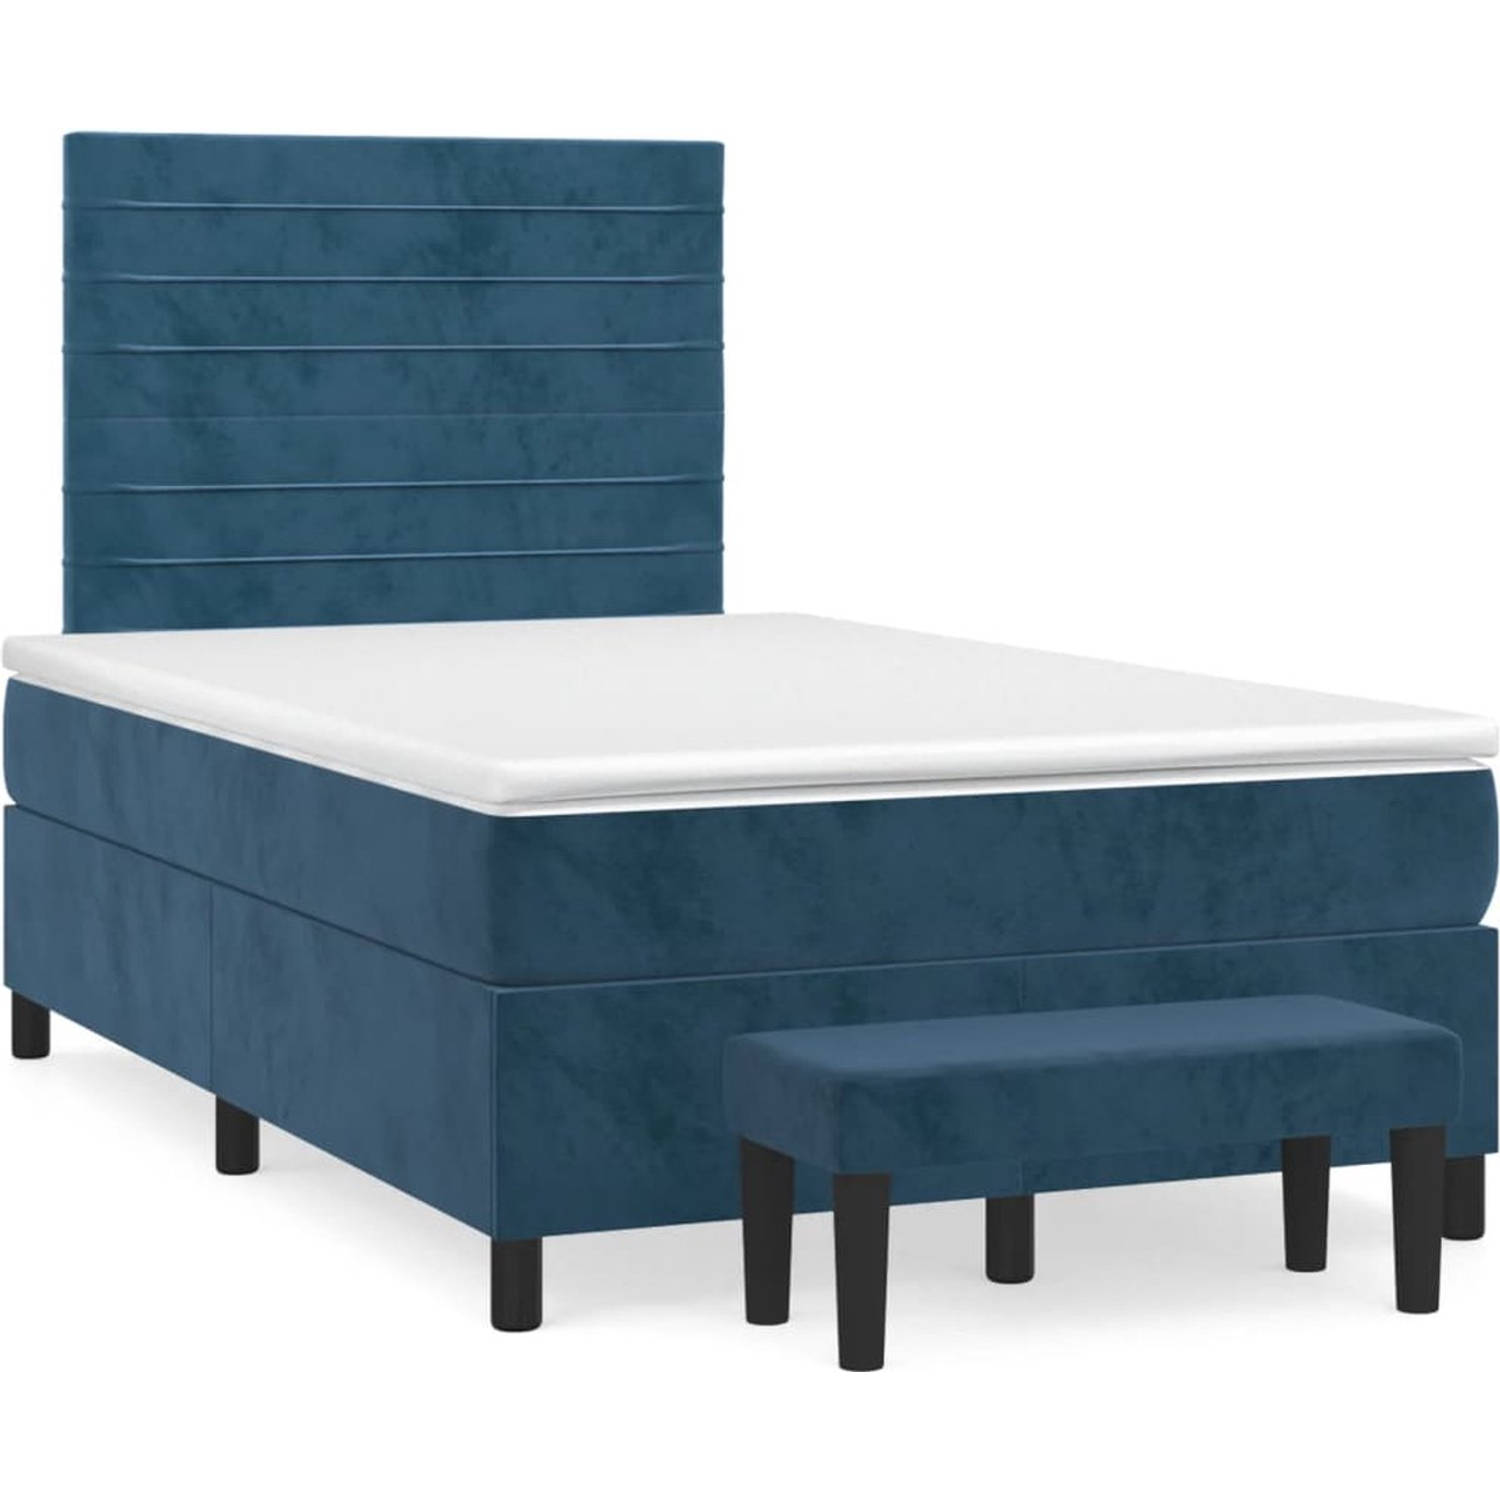 The Living Store Boxspringbed - donkerblauw - 203 x 120 x 118/128 cm - zacht fluweel